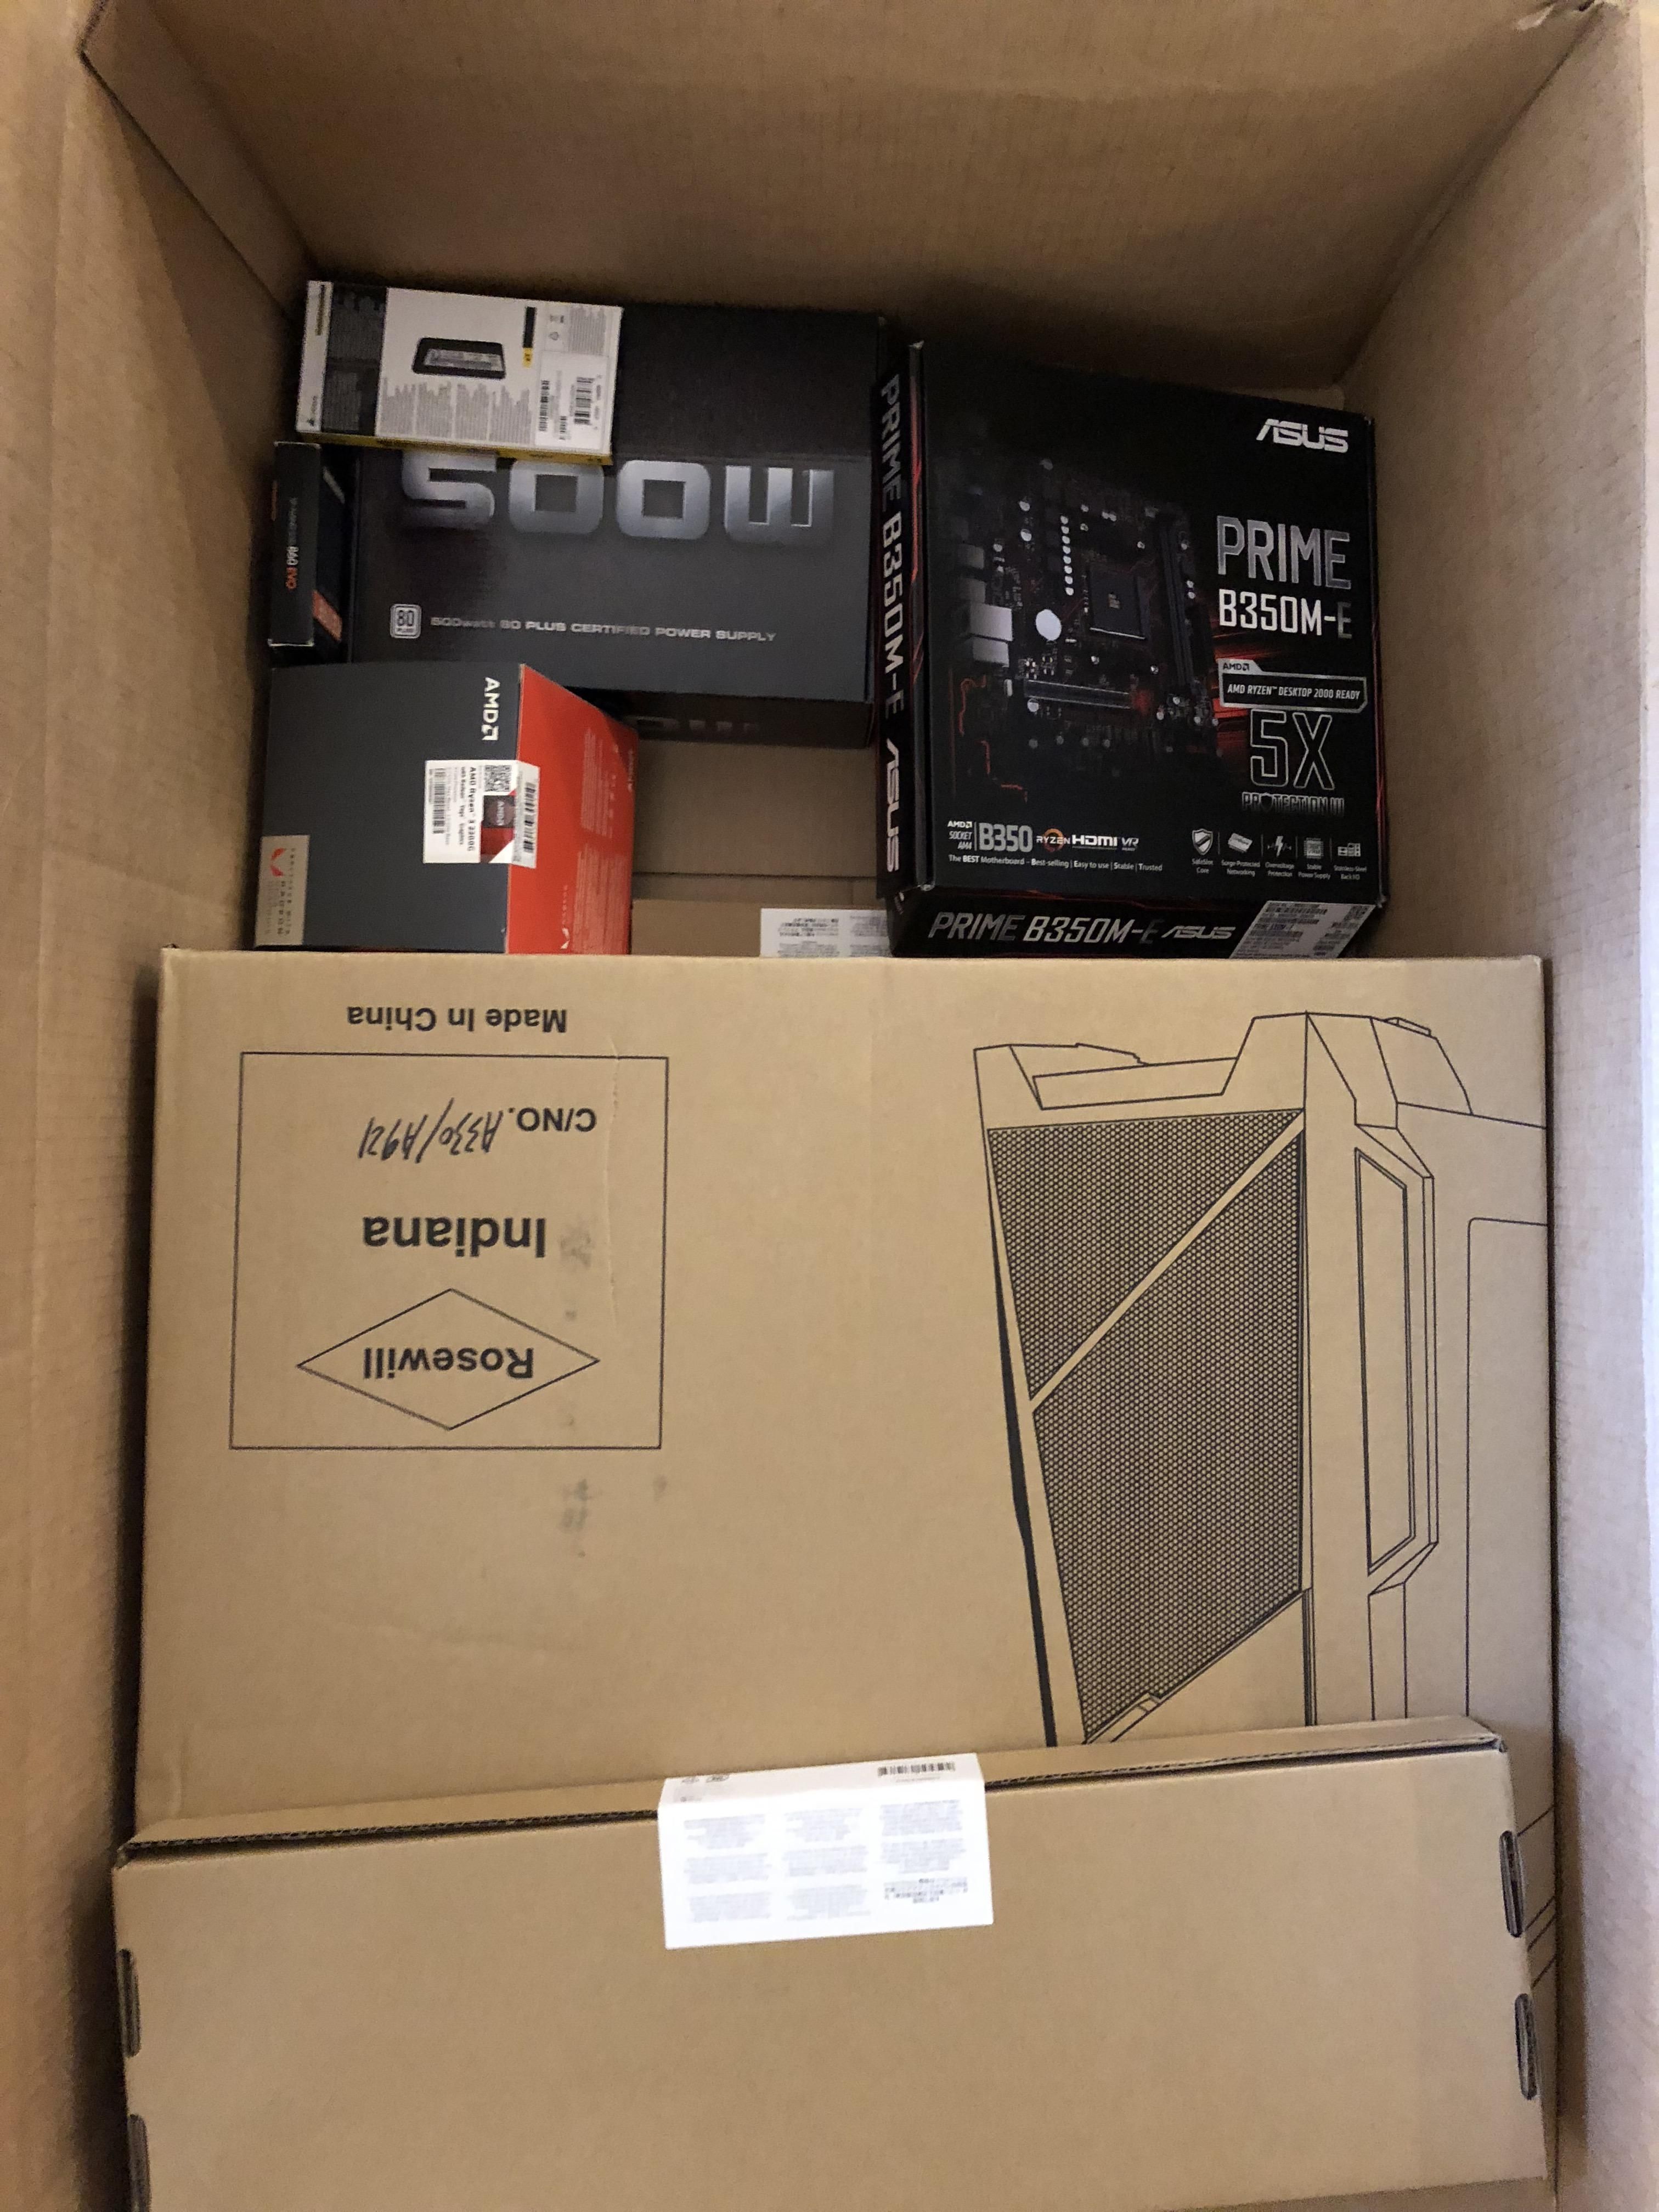 Mom wanted a computer for Christmas. She was initially disappointed.